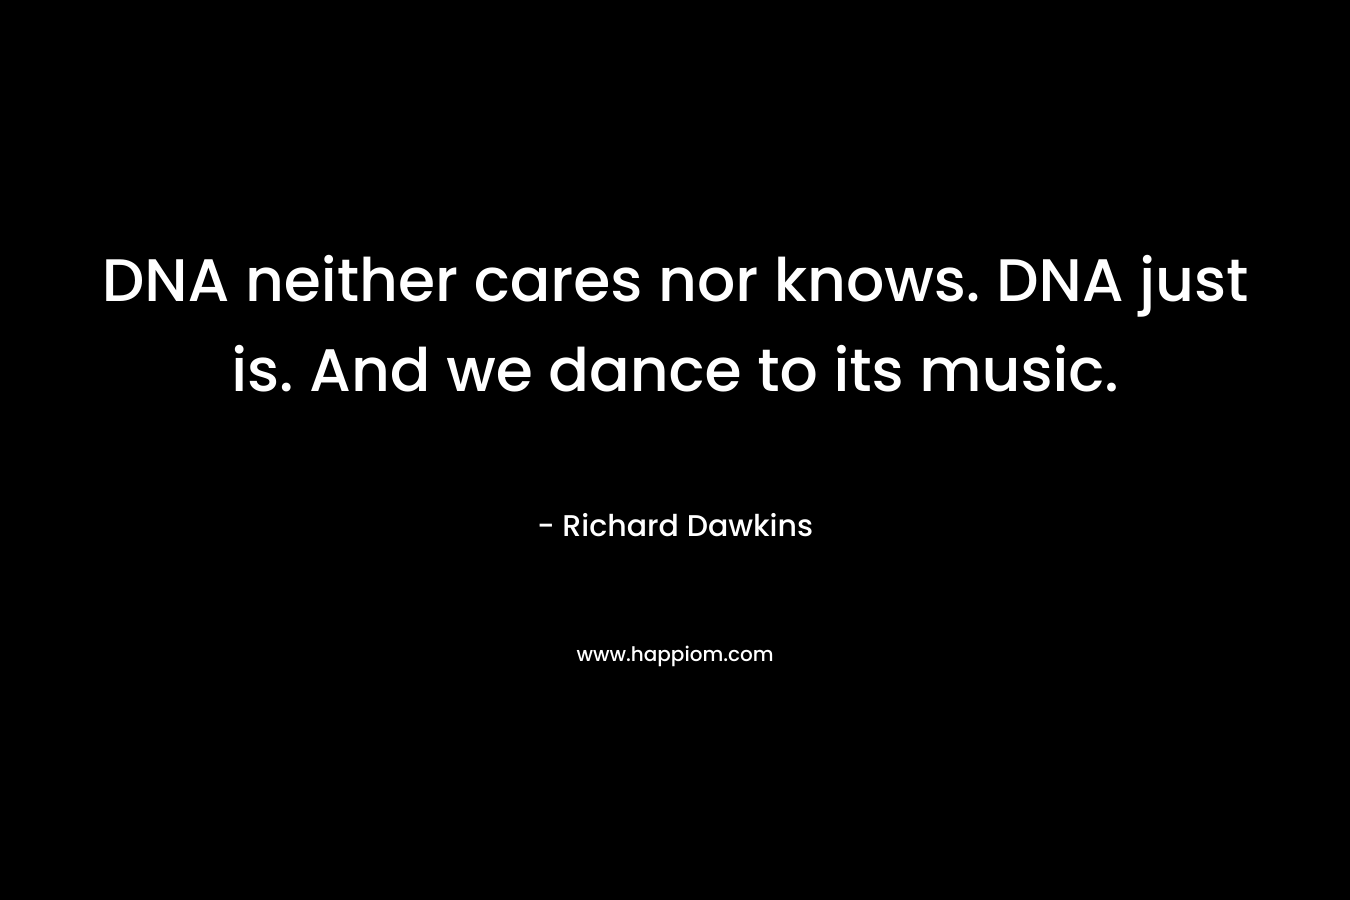 DNA neither cares nor knows. DNA just is. And we dance to its music.